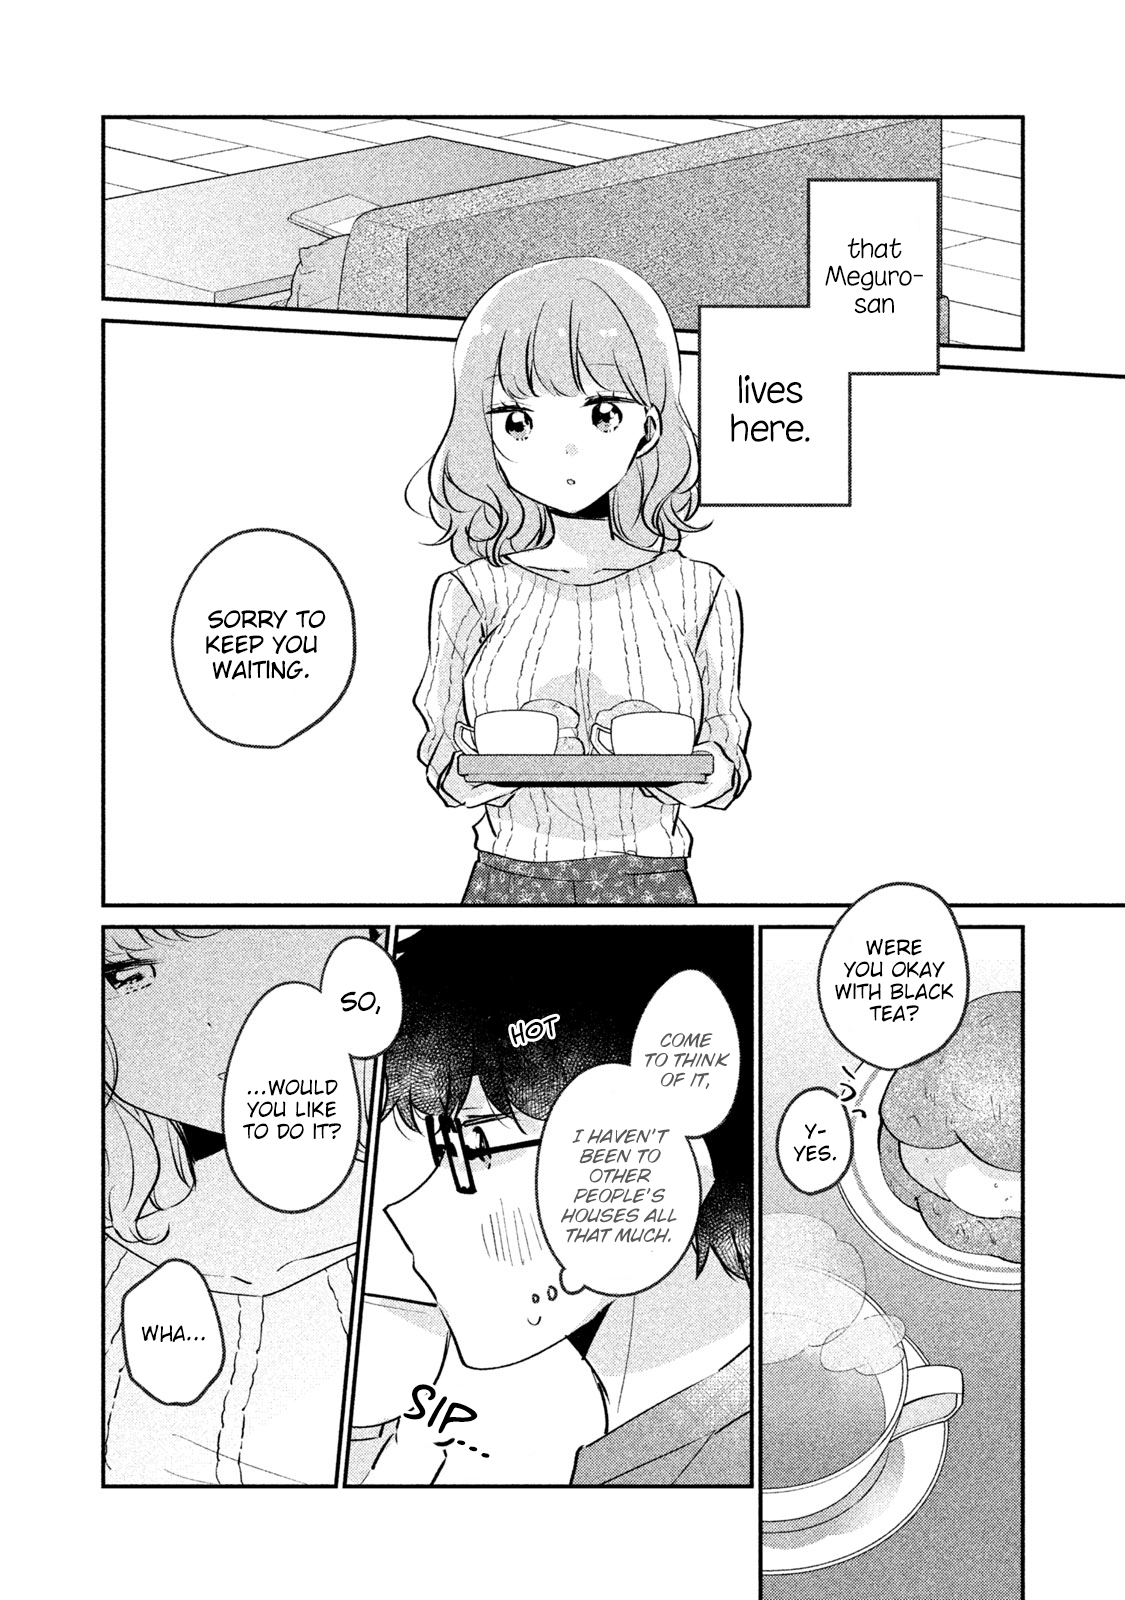 It's Not Meguro-san's First Time chapter 14 page 7